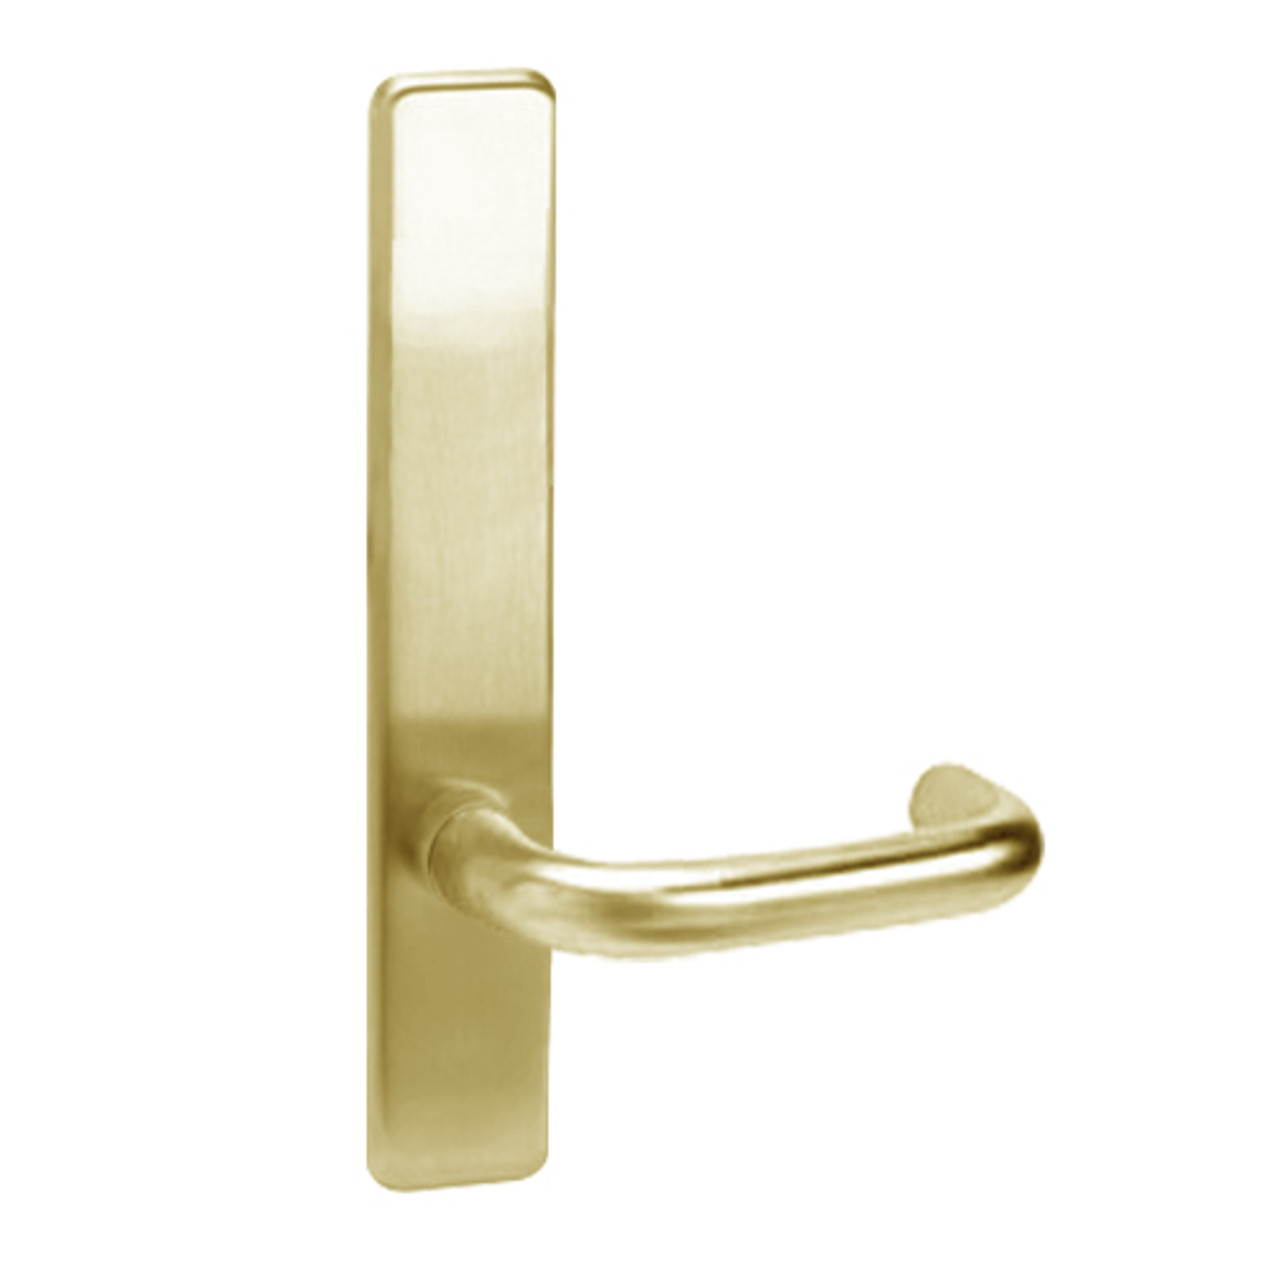 L855-606-LHR Corbin ED4000 Series Exit Device Trim with Classroom Lustra Lever in Satin Brass Finish